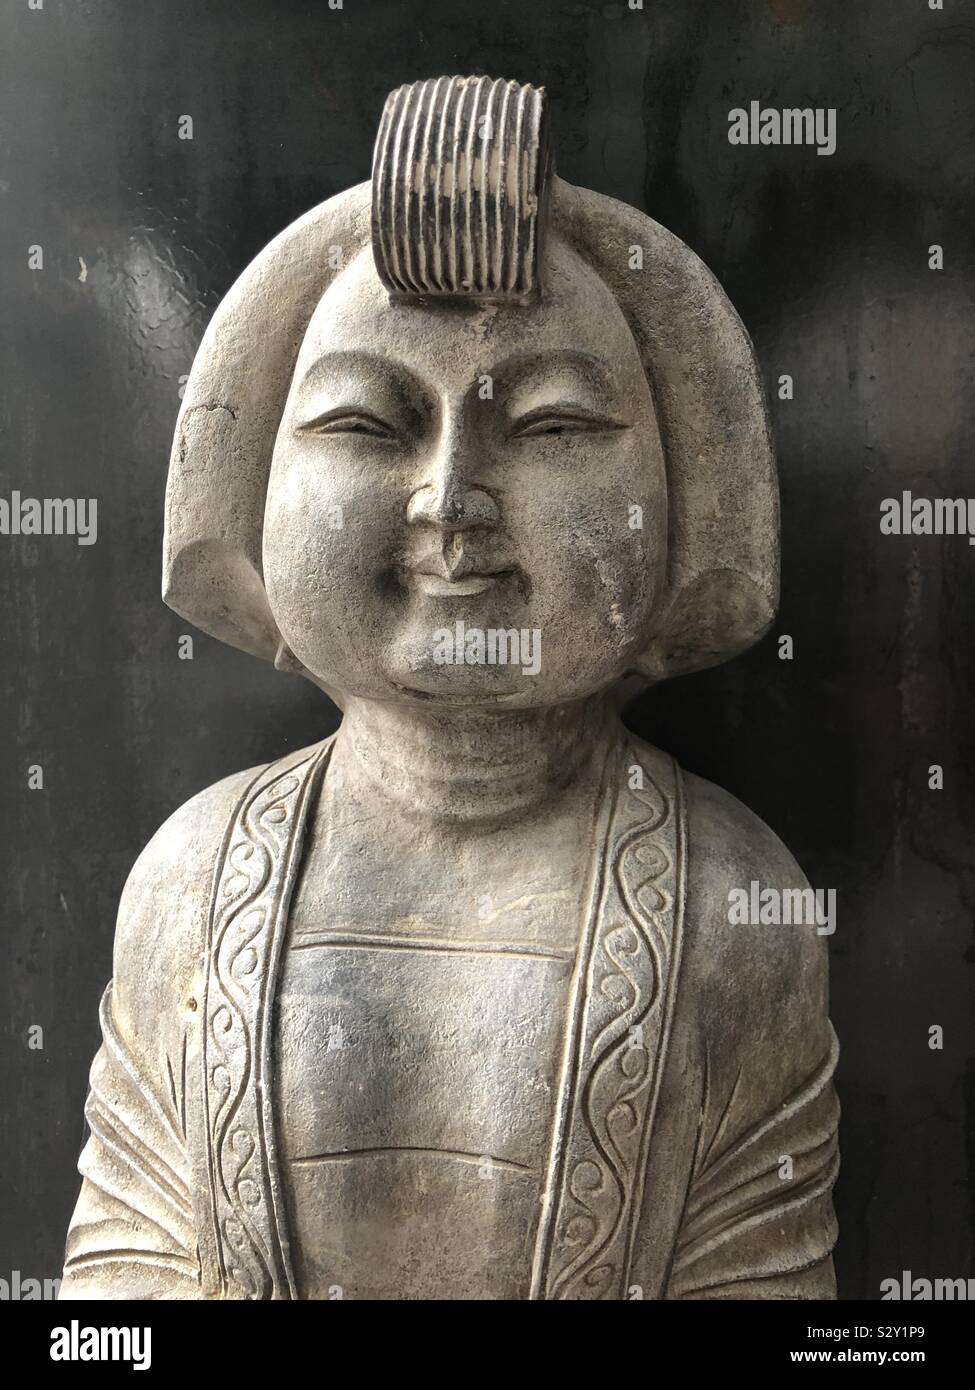 Frontal view of the upper half of a stone statue featuring a round Asian face, bobbed hairstyle with quiff against a black background. Stock Photo